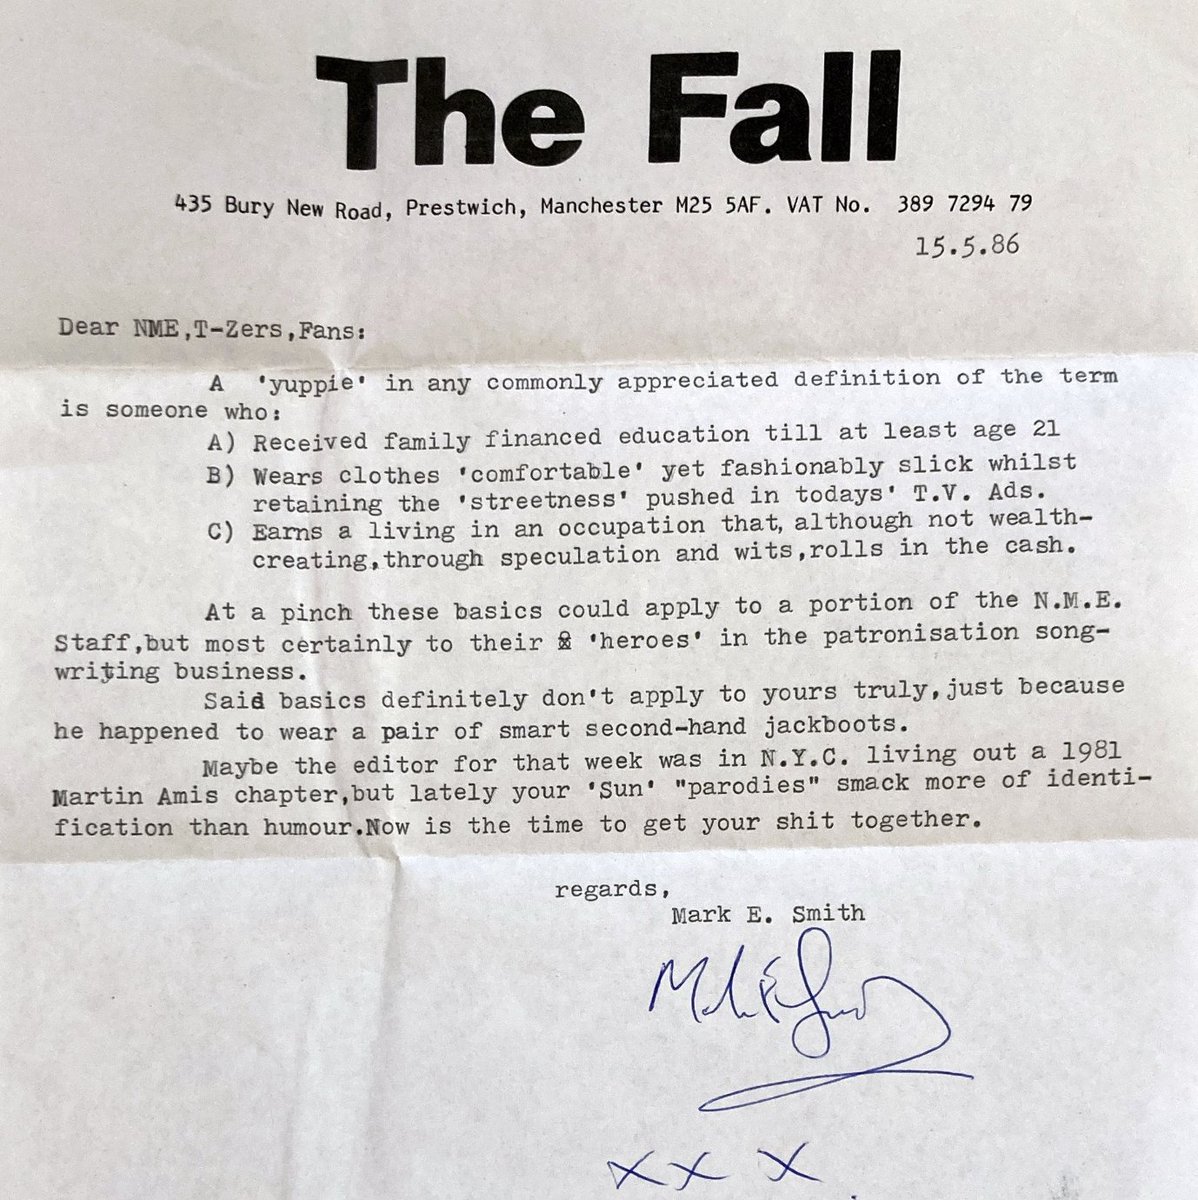 'Now is the time to get your shit together.' Mark E. Smith responds to the @NME calling him a yuppie in 1986.